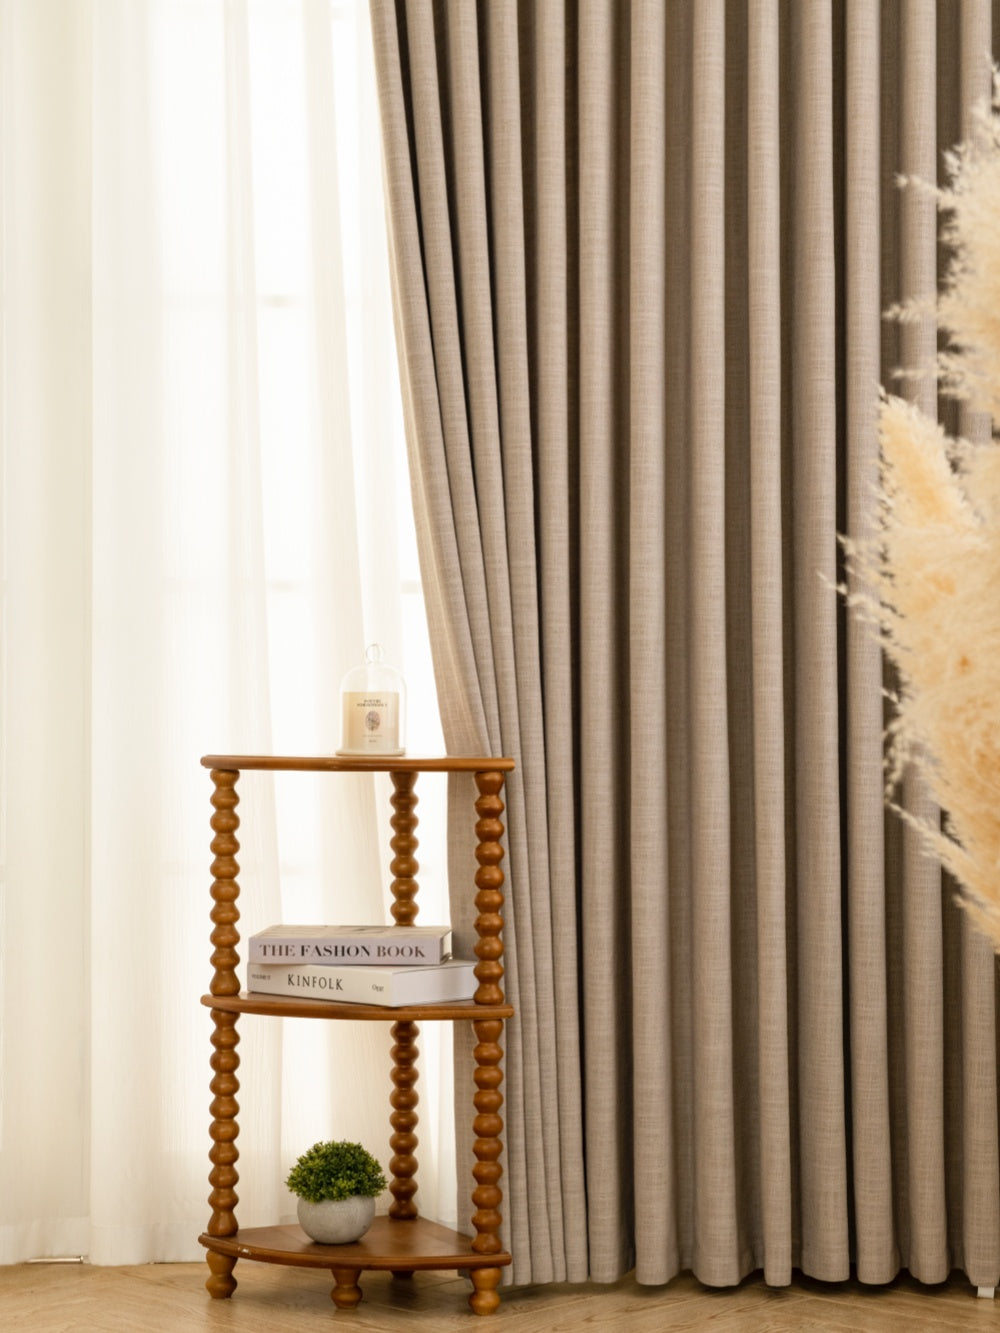 Contemporary living room decor with gray pleated linen blend drapes and white sheer curtains, wooden side table displaying home decor book and plant